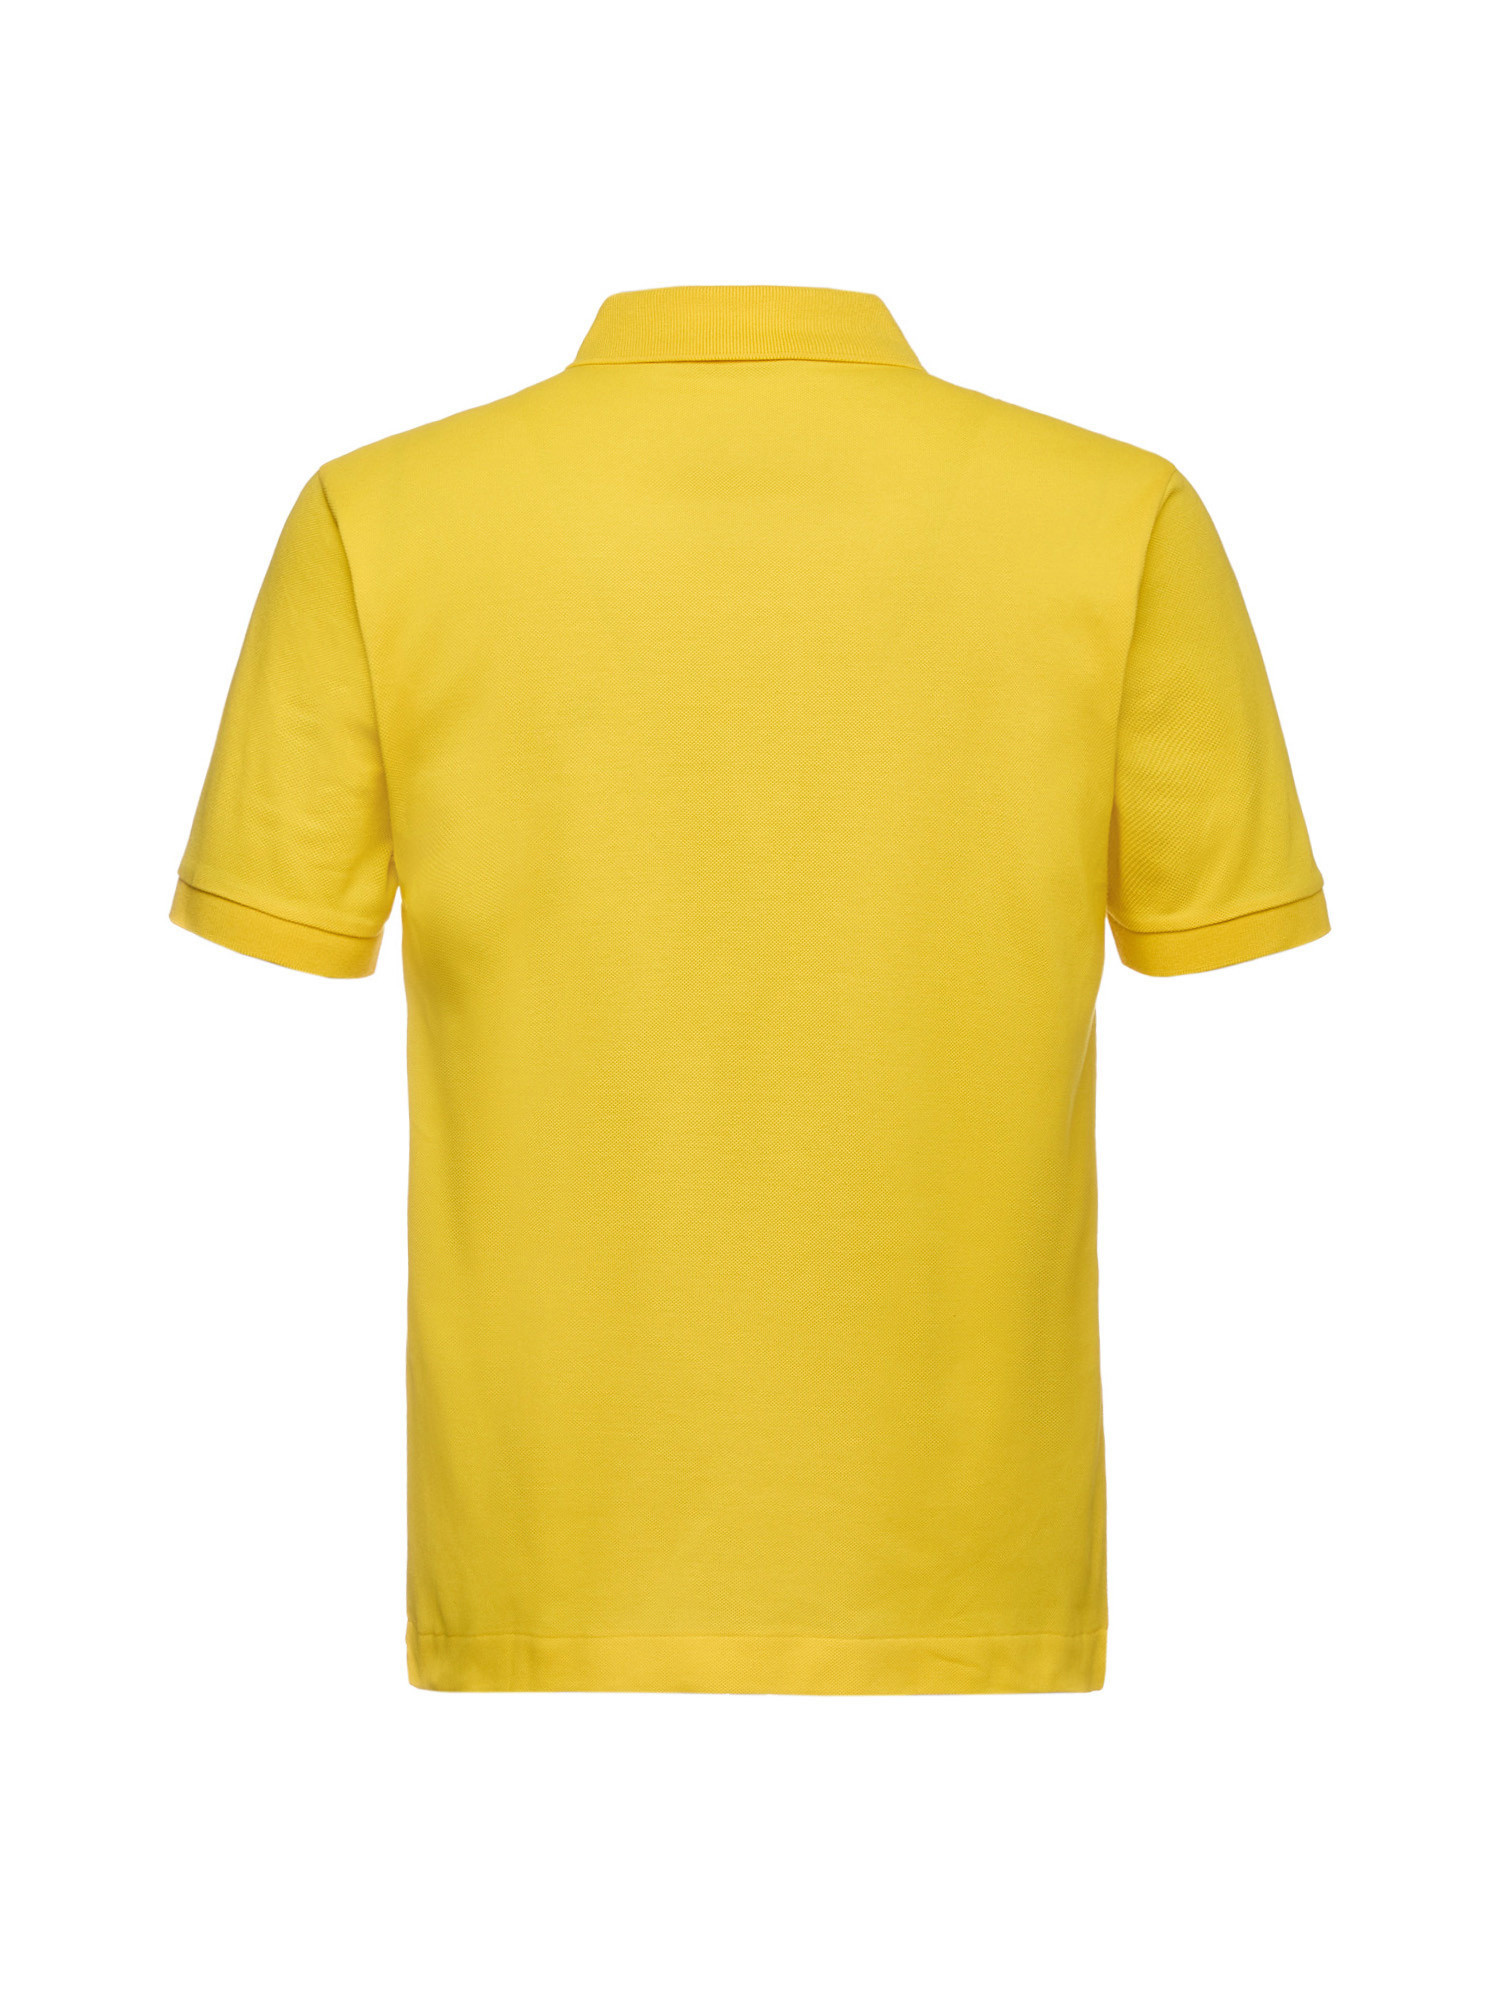 Lacoste - Classic cut polo shirt in petit piquè cotton, Yellow, large image number 1